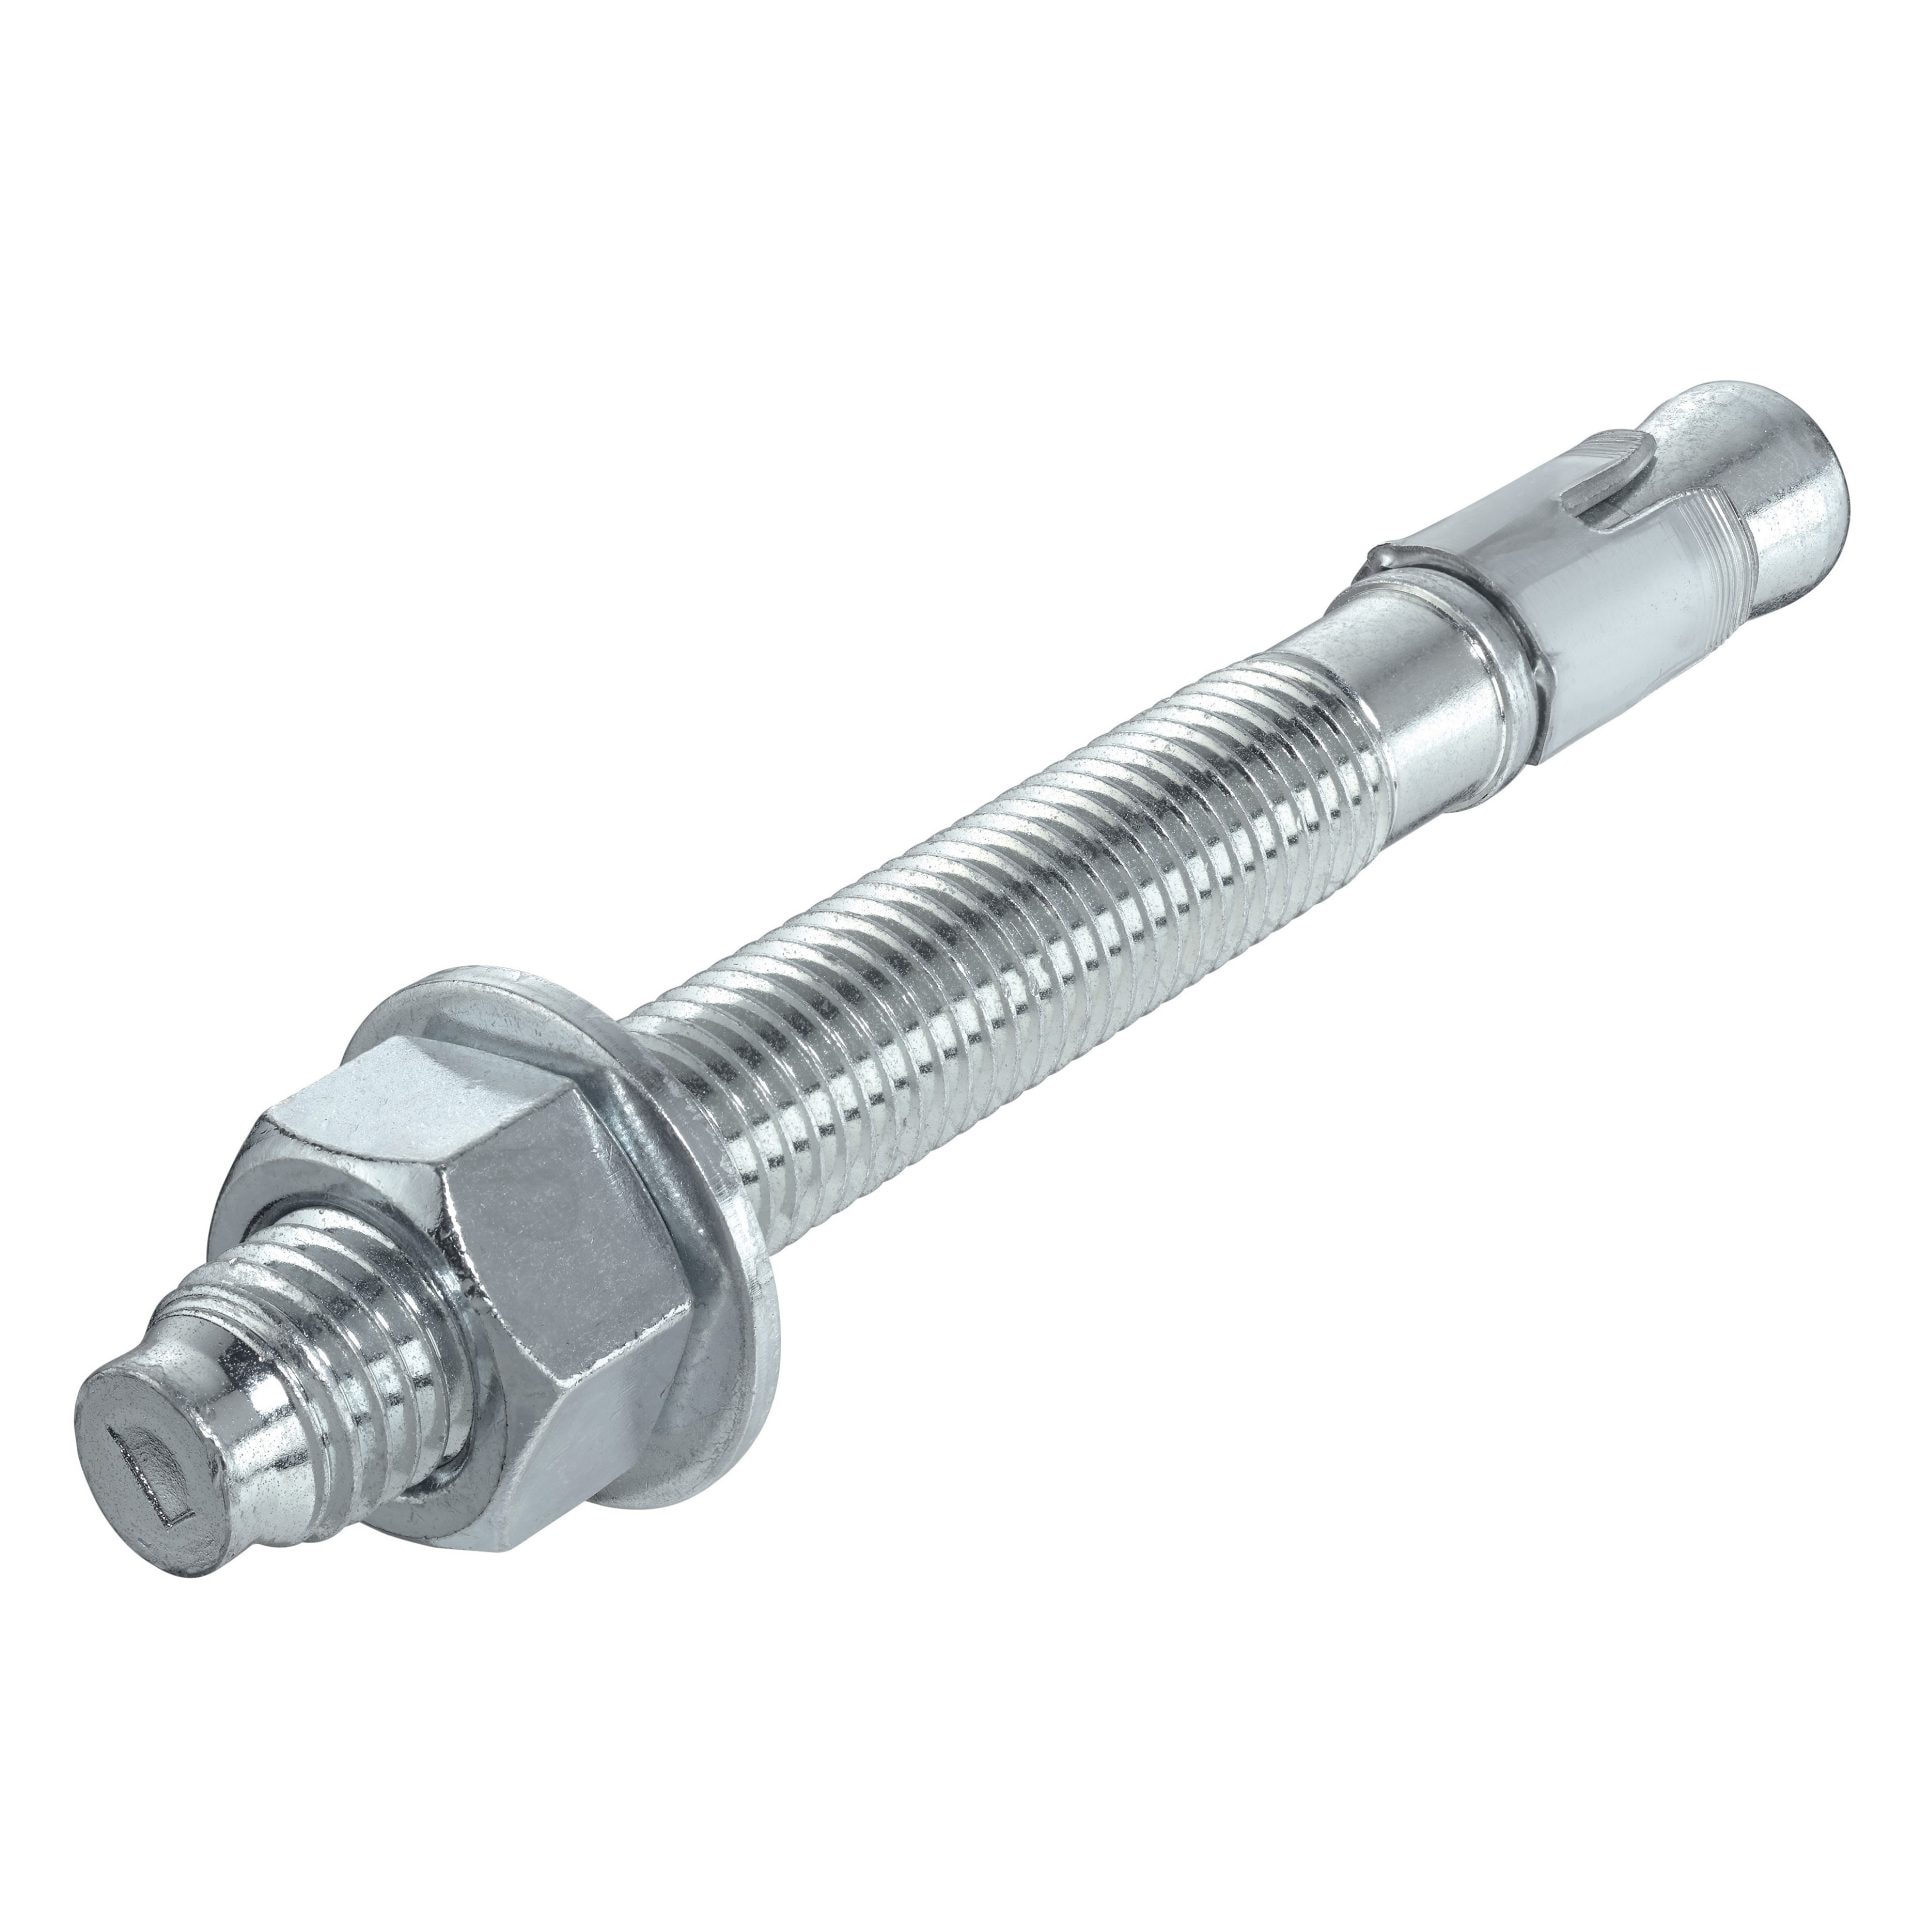 Hilti mechanical wedge anchors with HPD Health Product Declarations